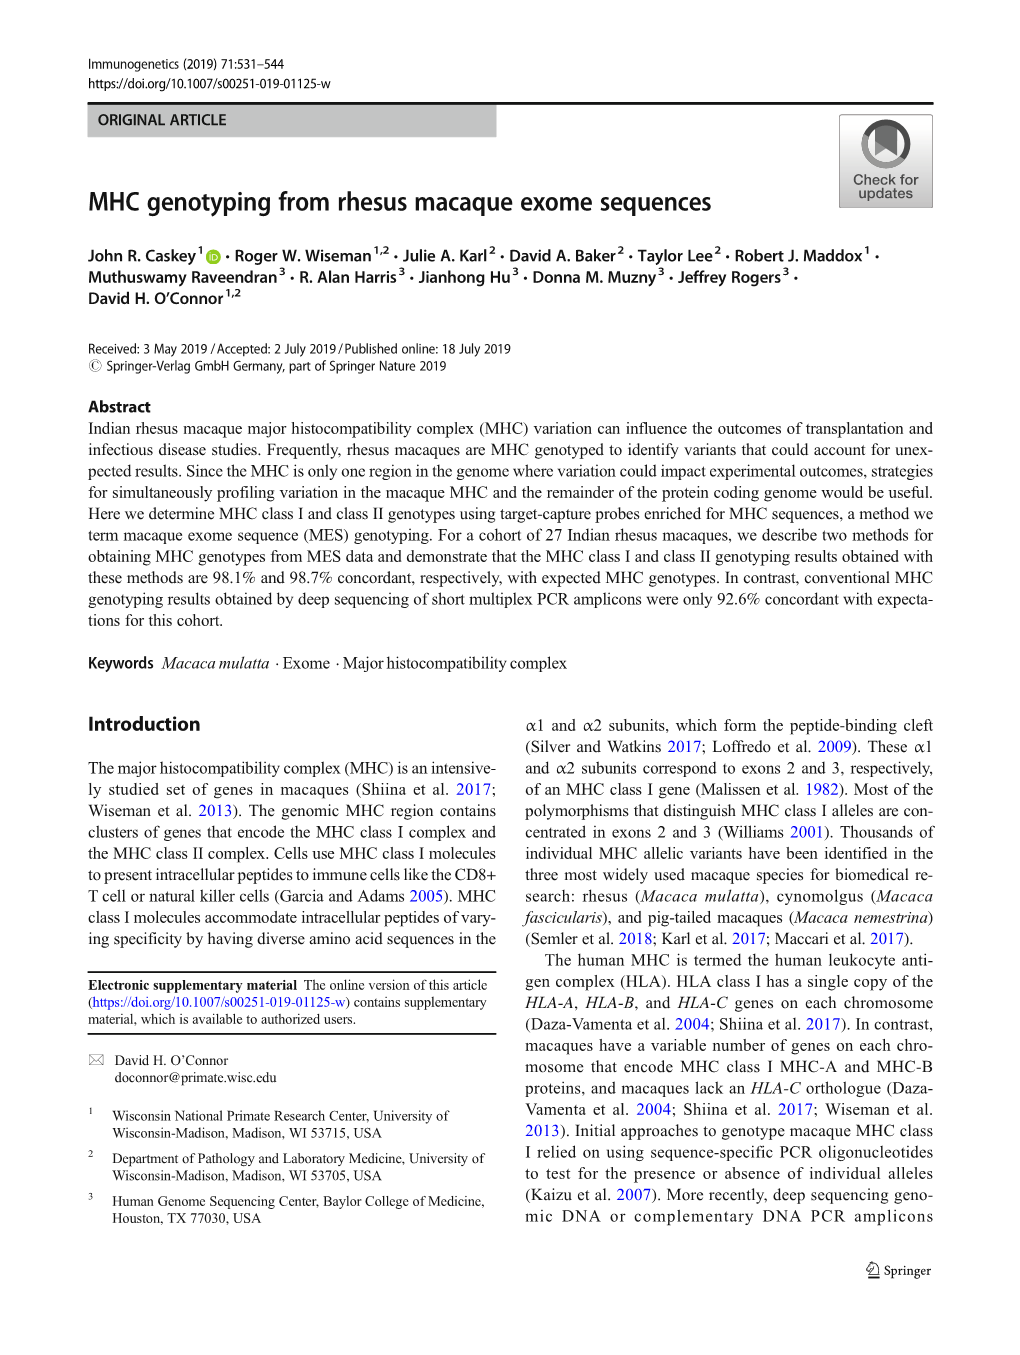 MHC Genotyping from Rhesus Macaque Exome Sequences